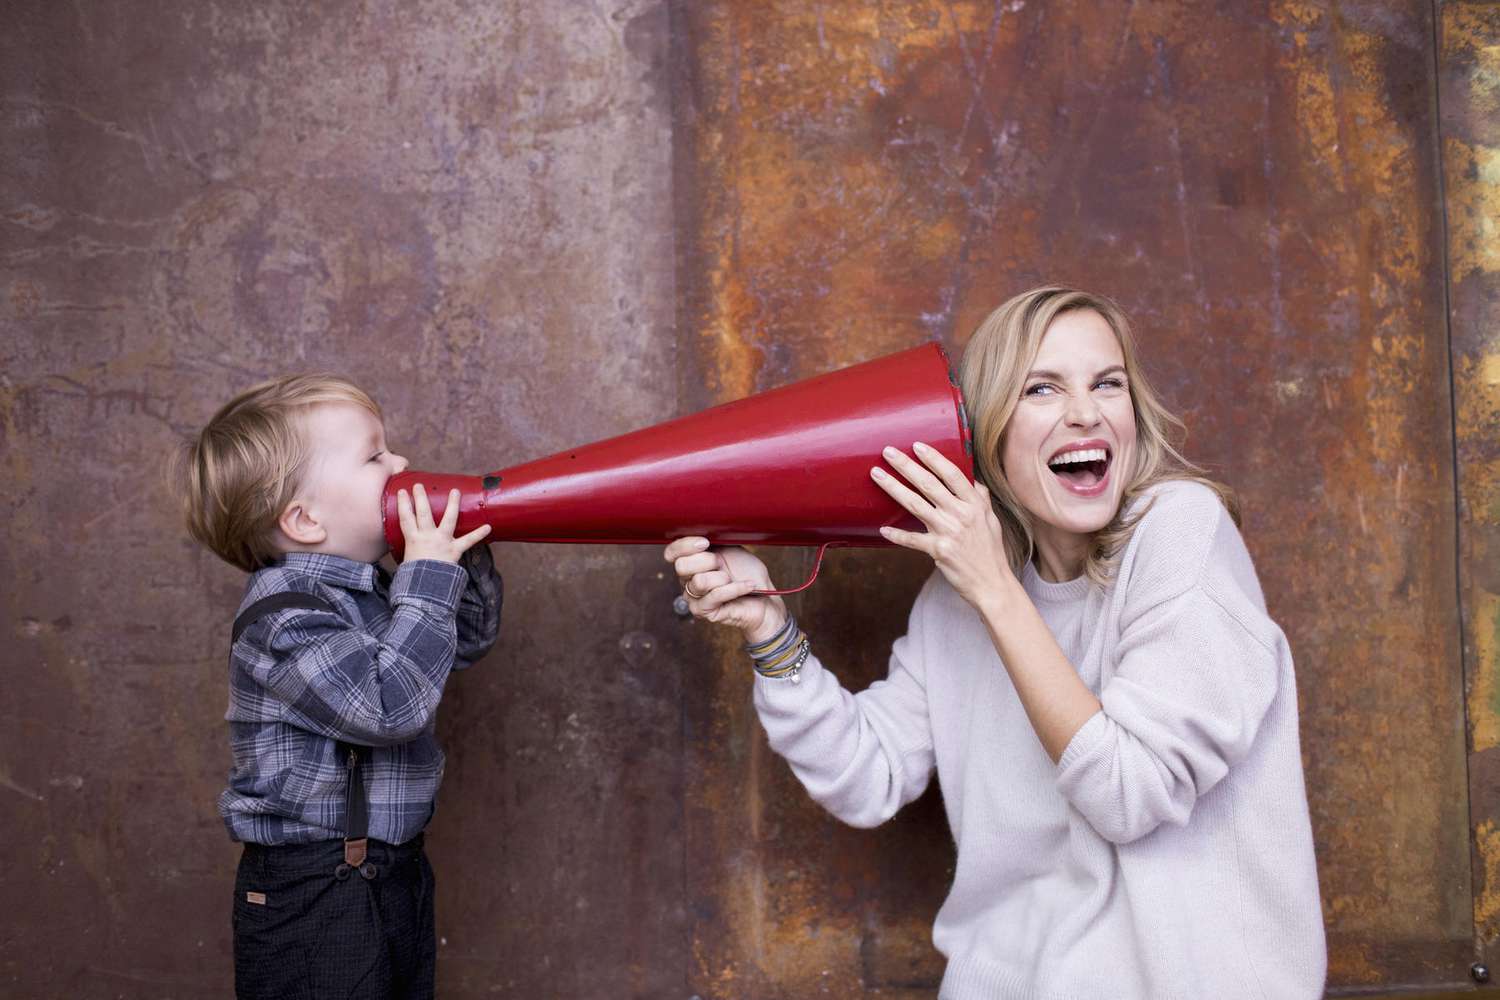 Young boy speaking into megaphone, woman holding megaphone to her ear